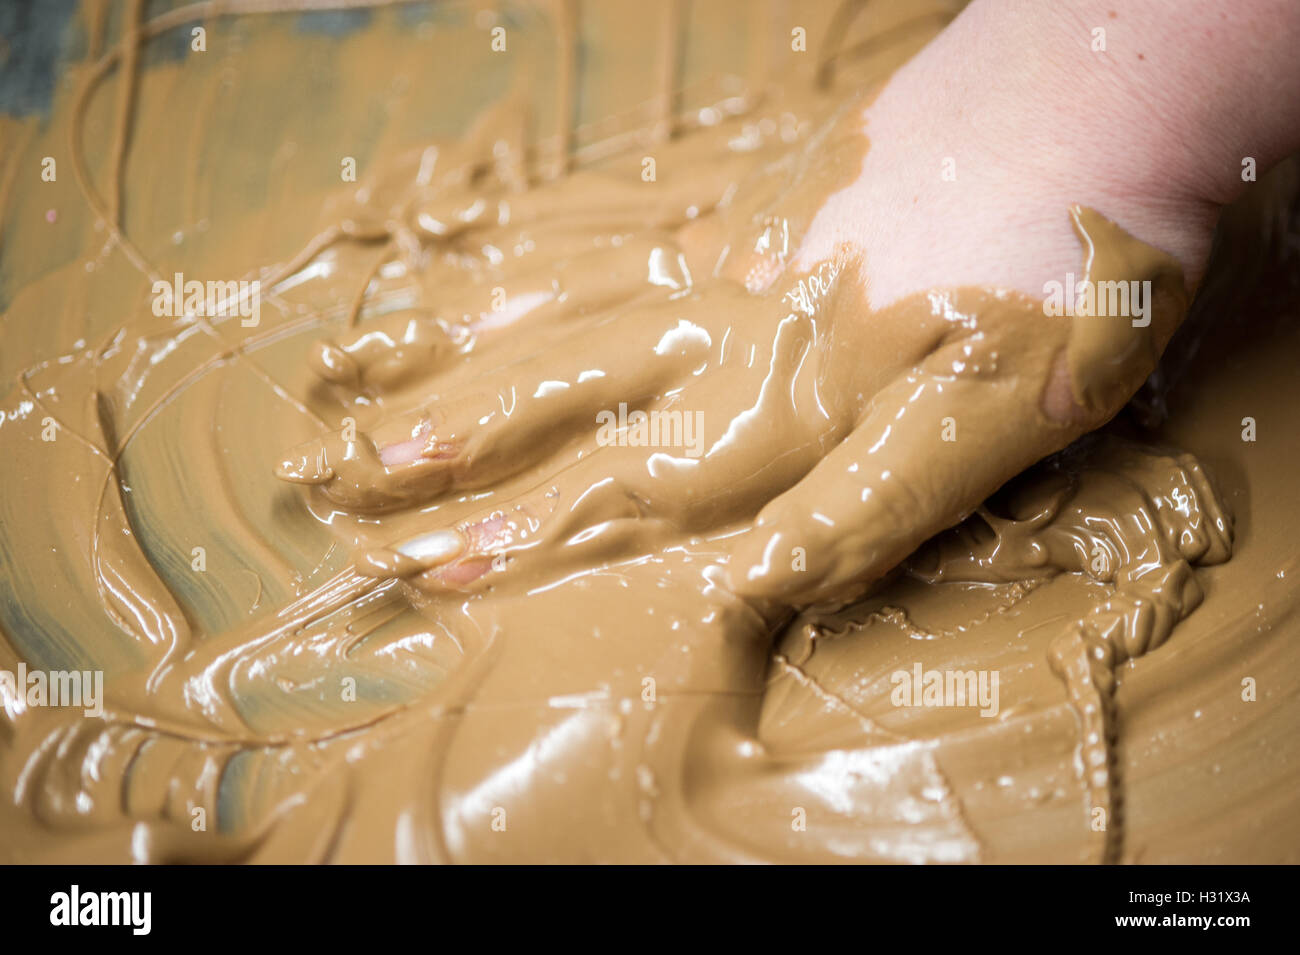 Hand covered in melted chocolate Stock Photo